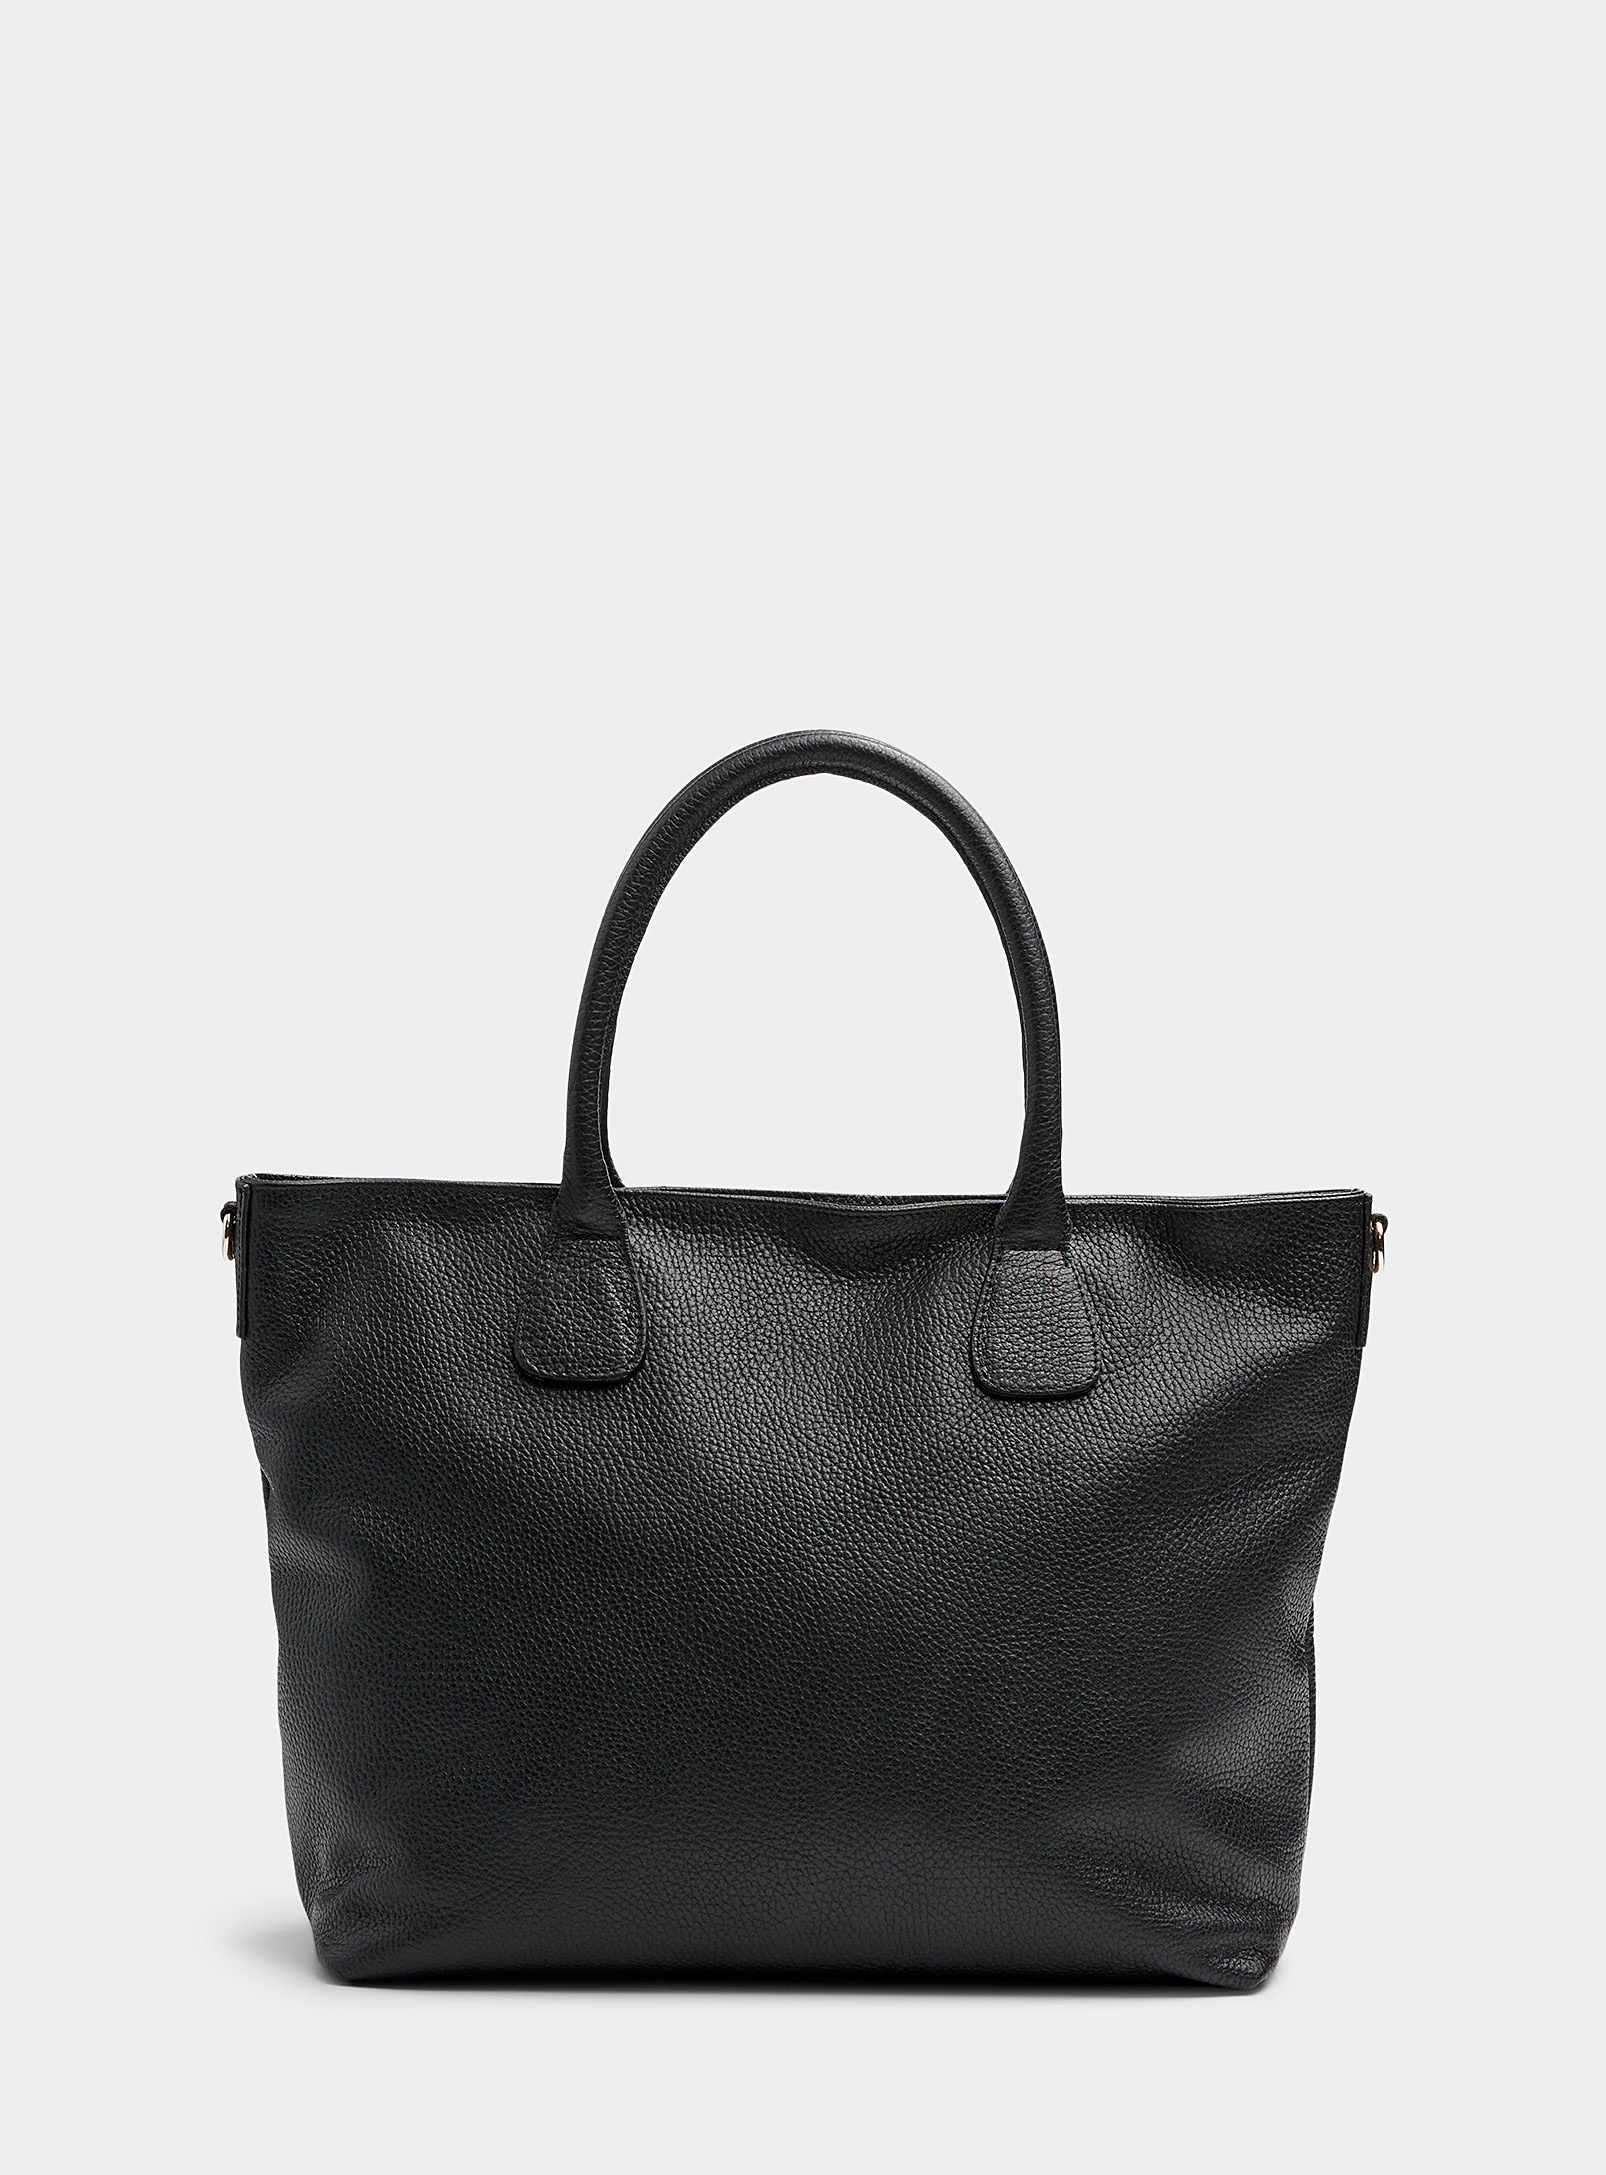 Simons - Women's Pebbled leather minimalist Tote Bag Exclusive collection from Italy